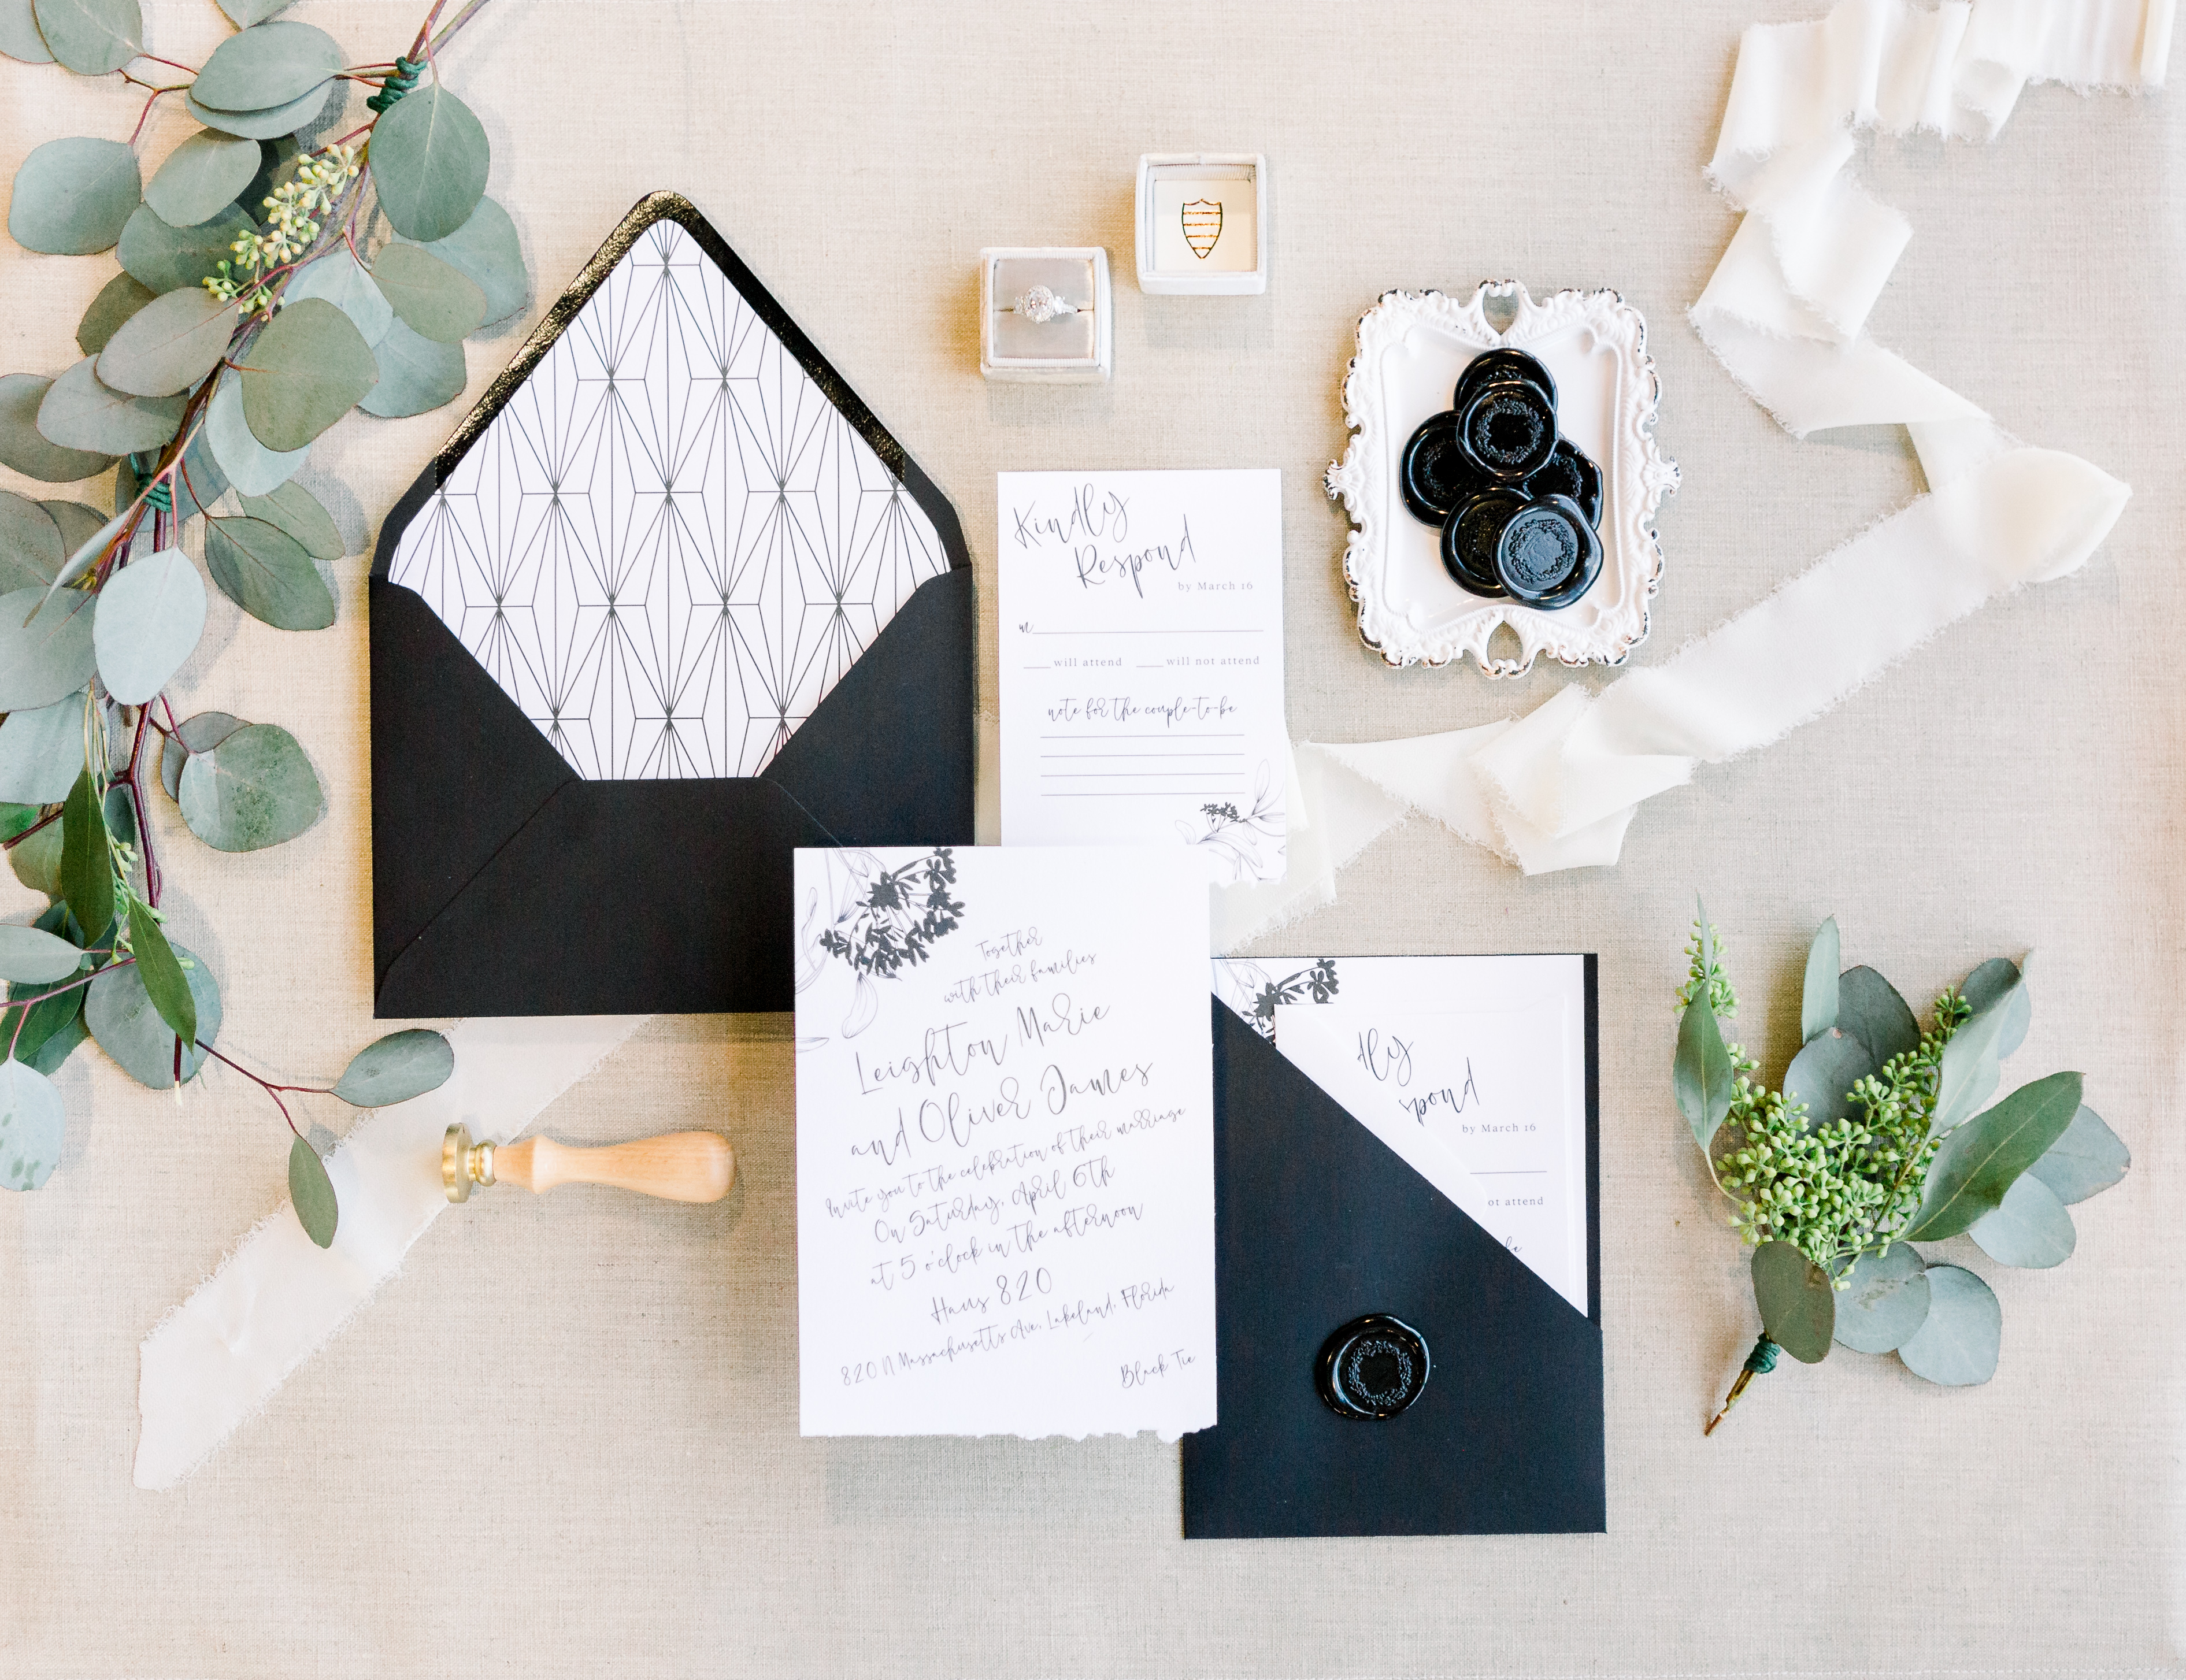 Wedding invitation suite - Matlock and Kelly Photography - Tampa, Florida